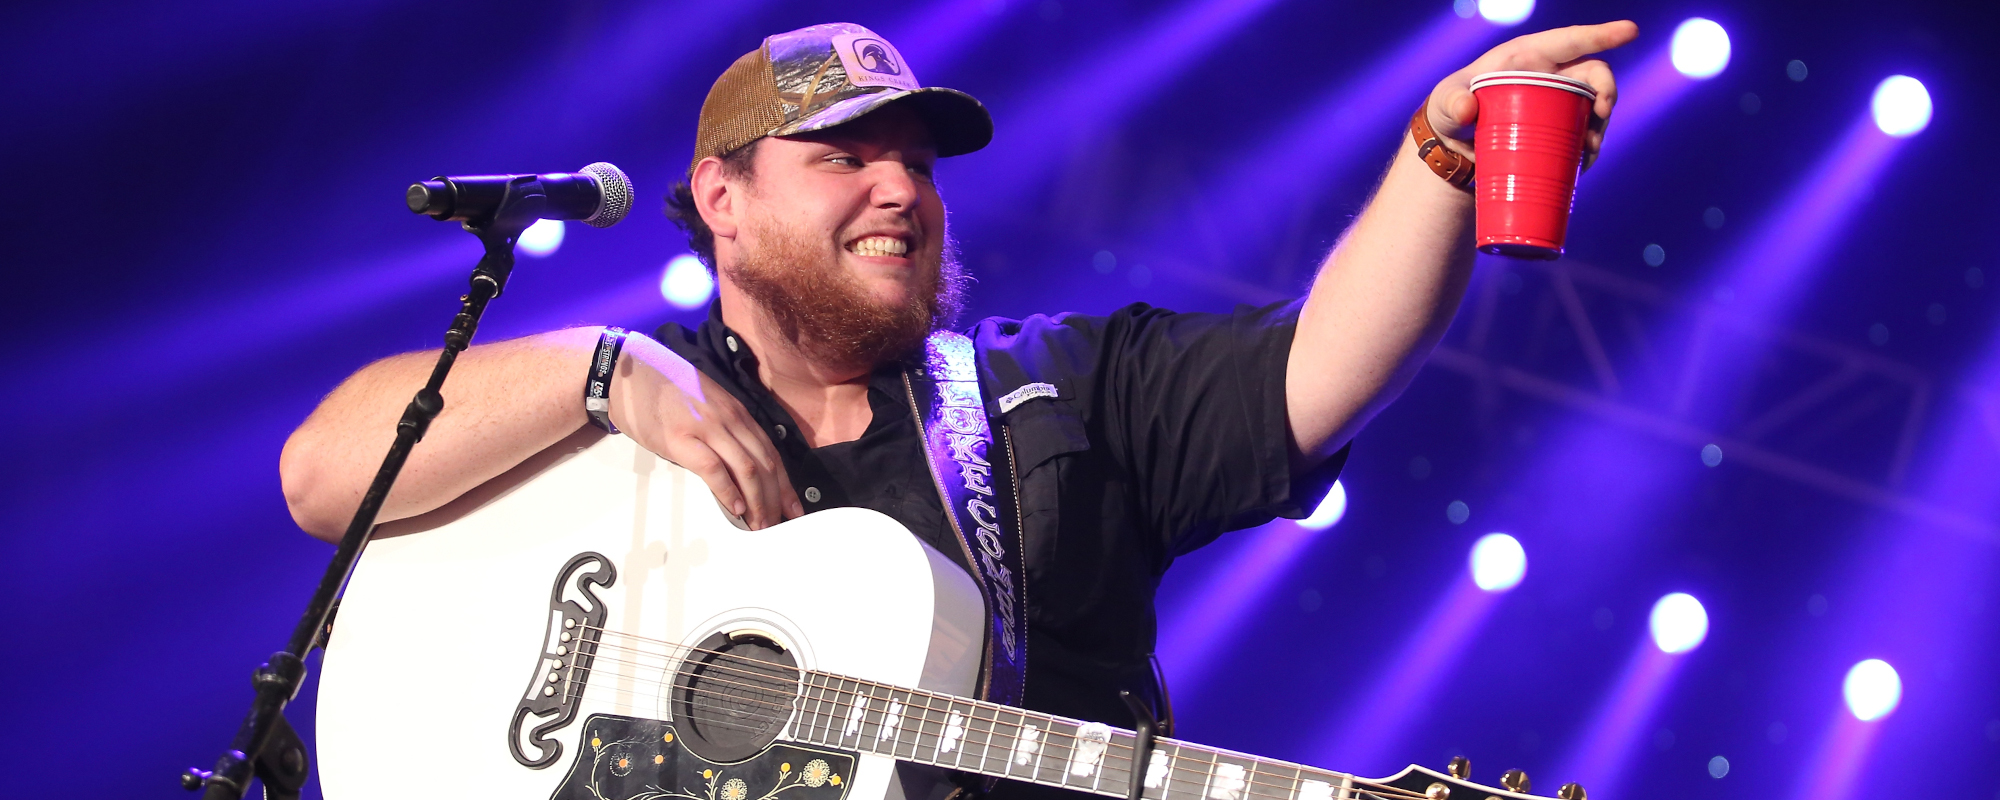 A Desperate Plea for Harmony: The Meaning Behind “The Great Divide” by Luke Combs and Billy Strings